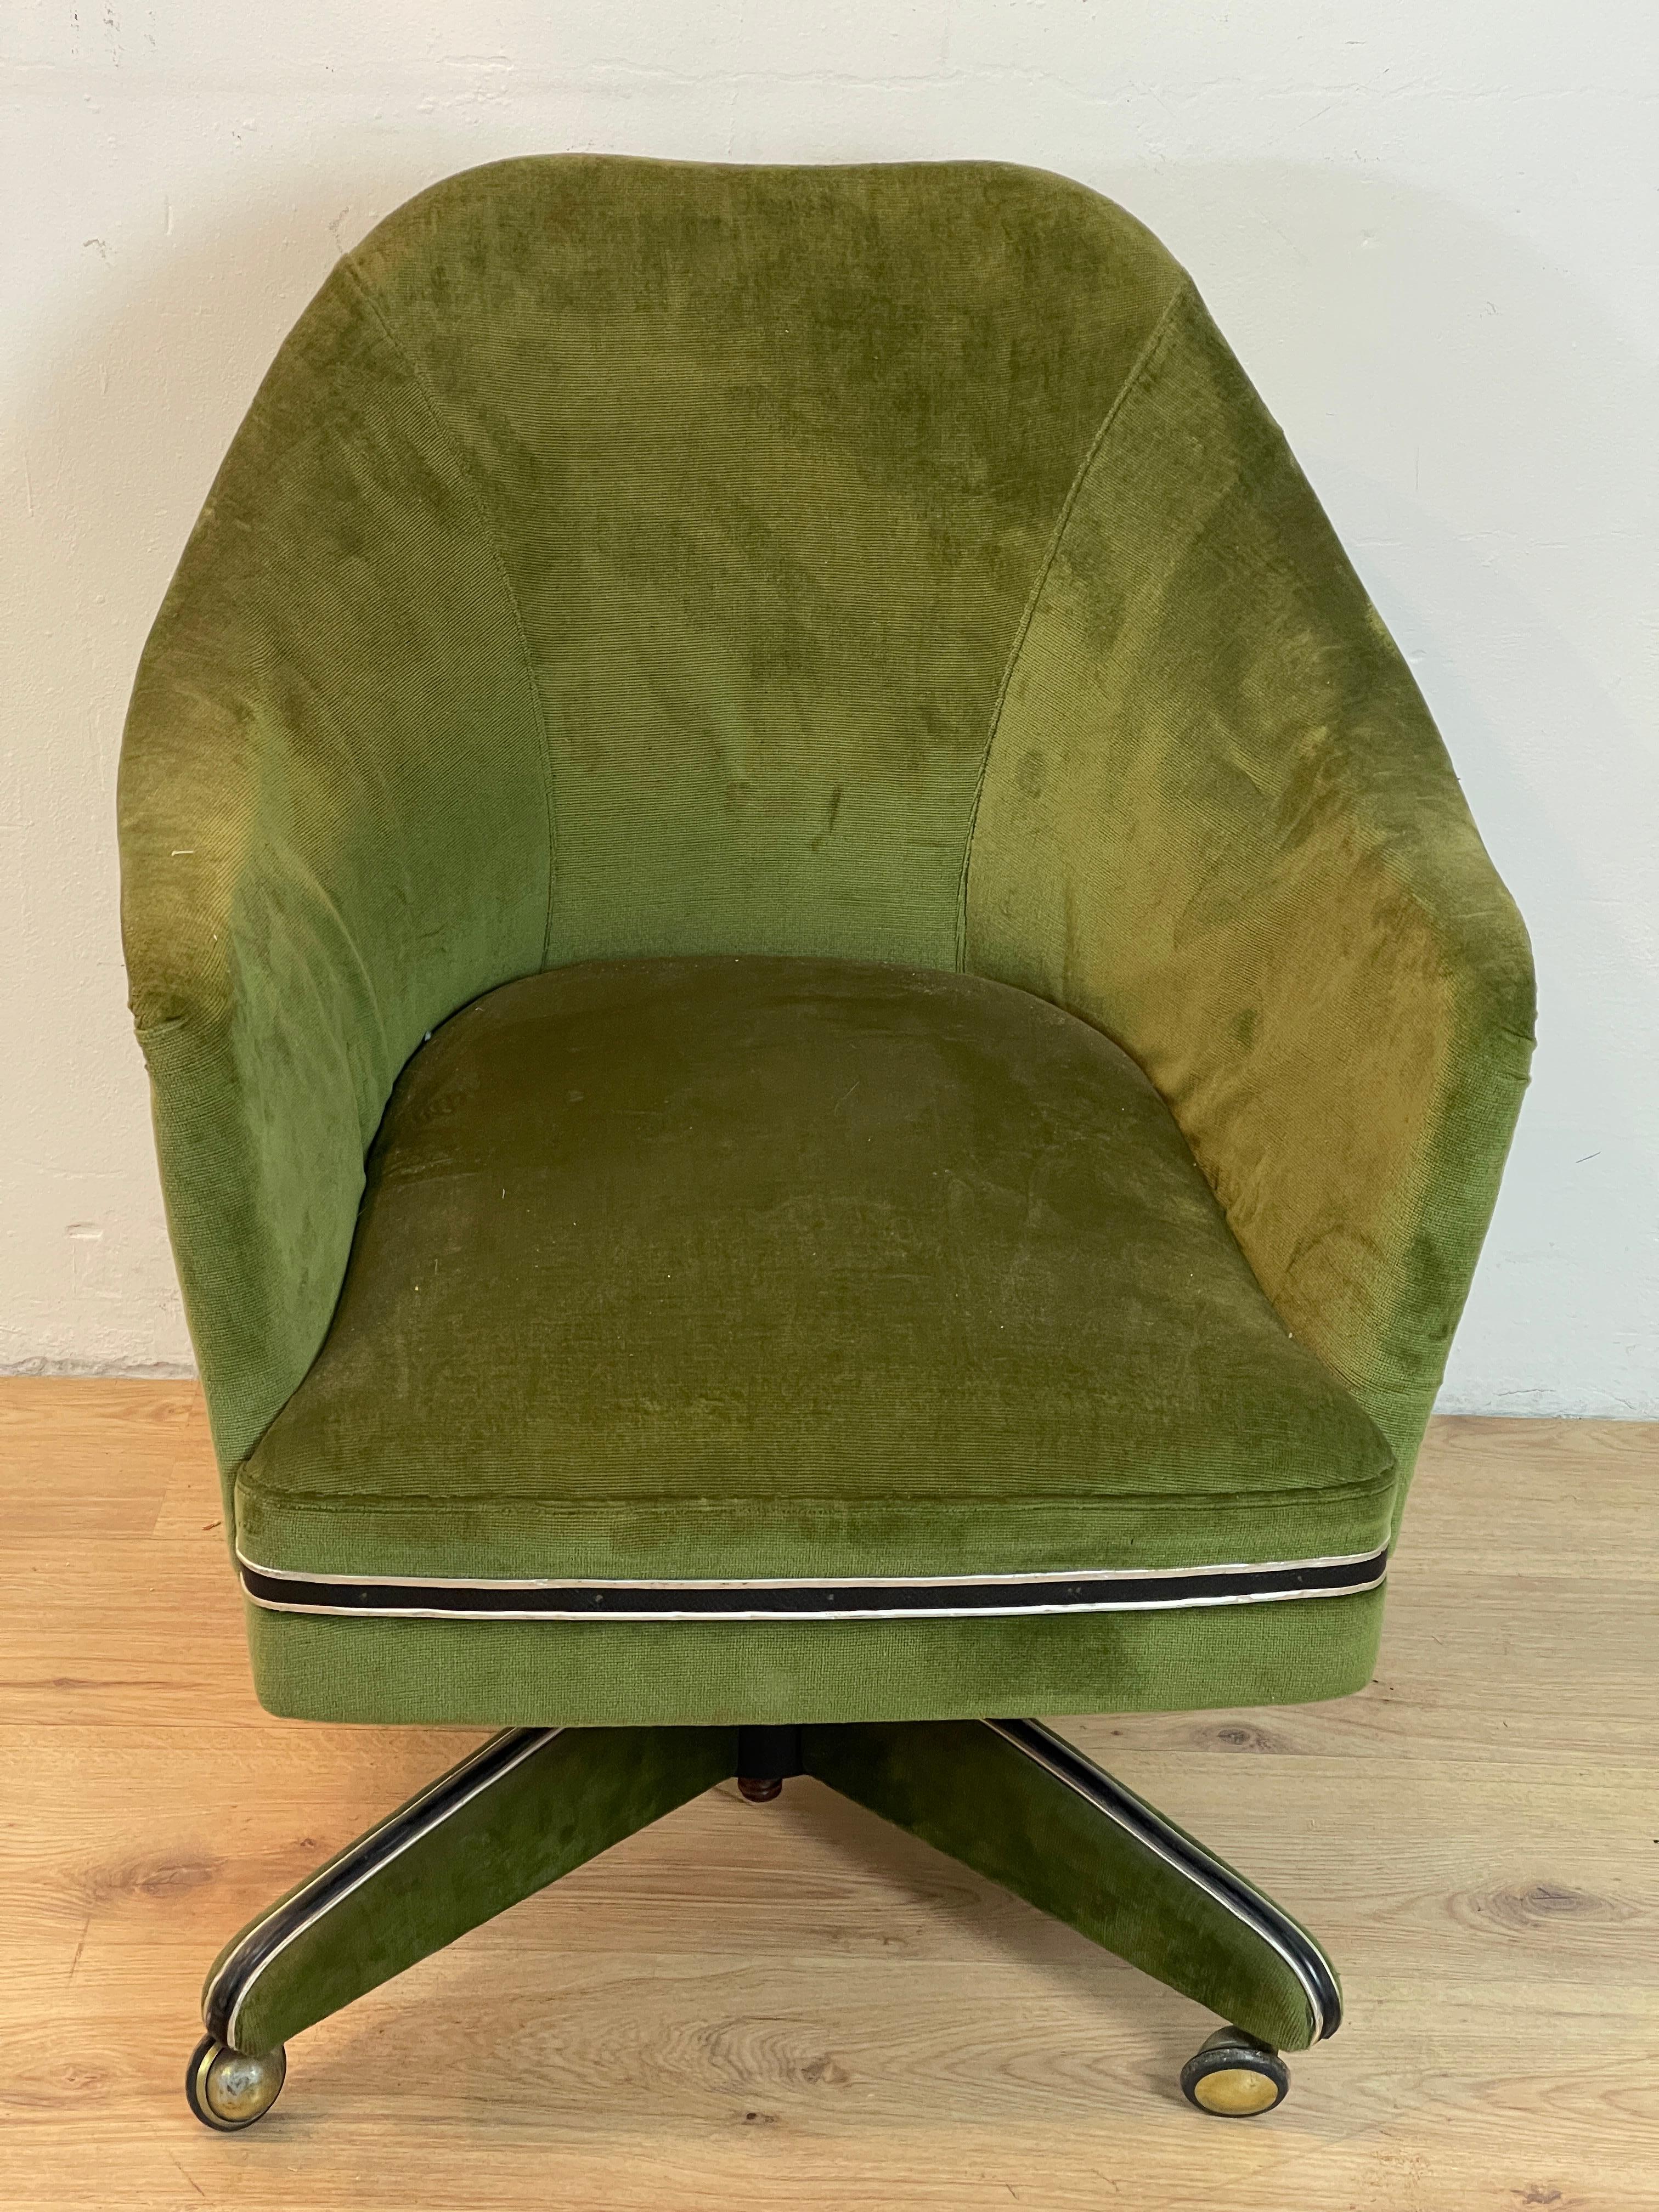 Desk armchair in green fabric, adjustable in height, equipped with wheels, all working and in excellent condition, the model of the armchair is attributable to the company specializing in design office furniture Anonima Castelli.